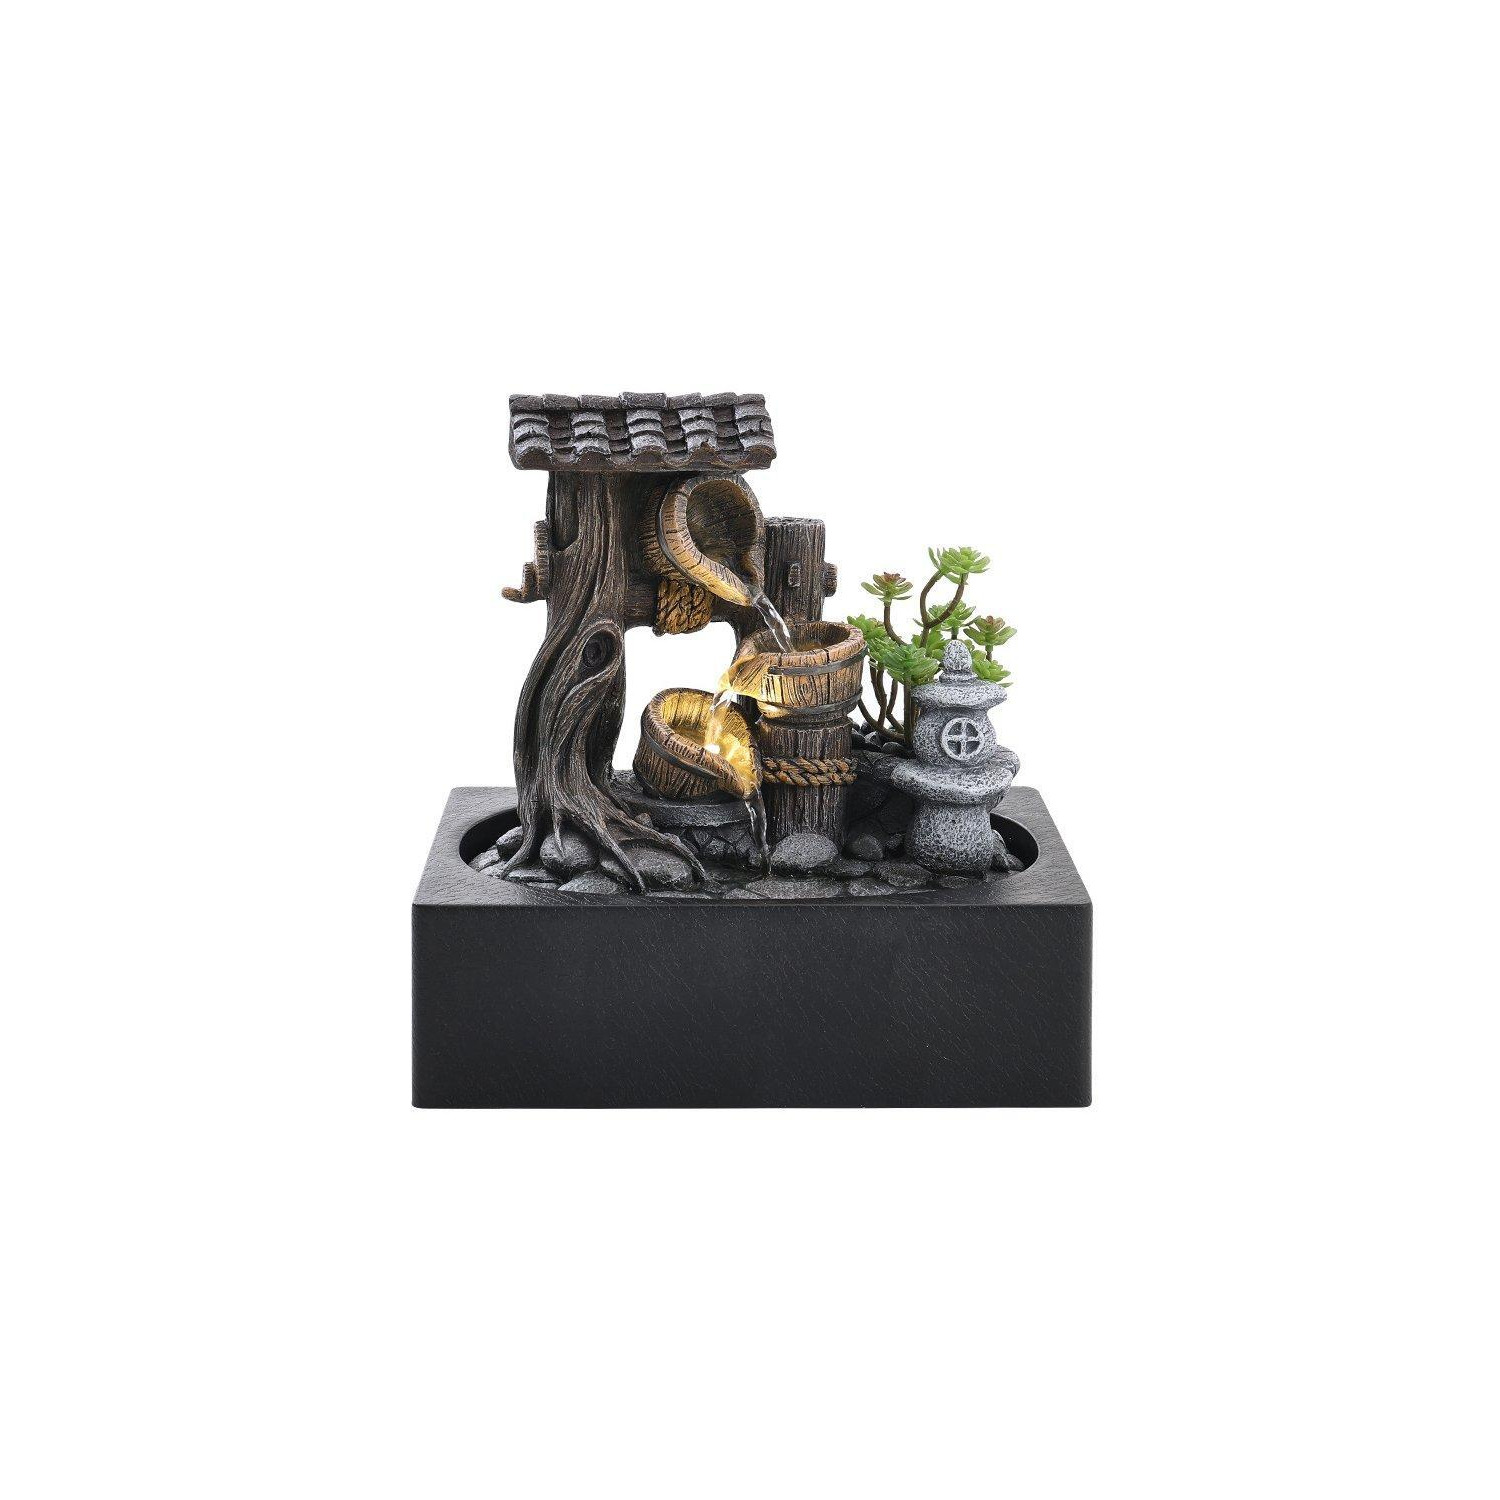 Tabletop Fountain Relaxation Water Feature for Home Office Decor - image 1